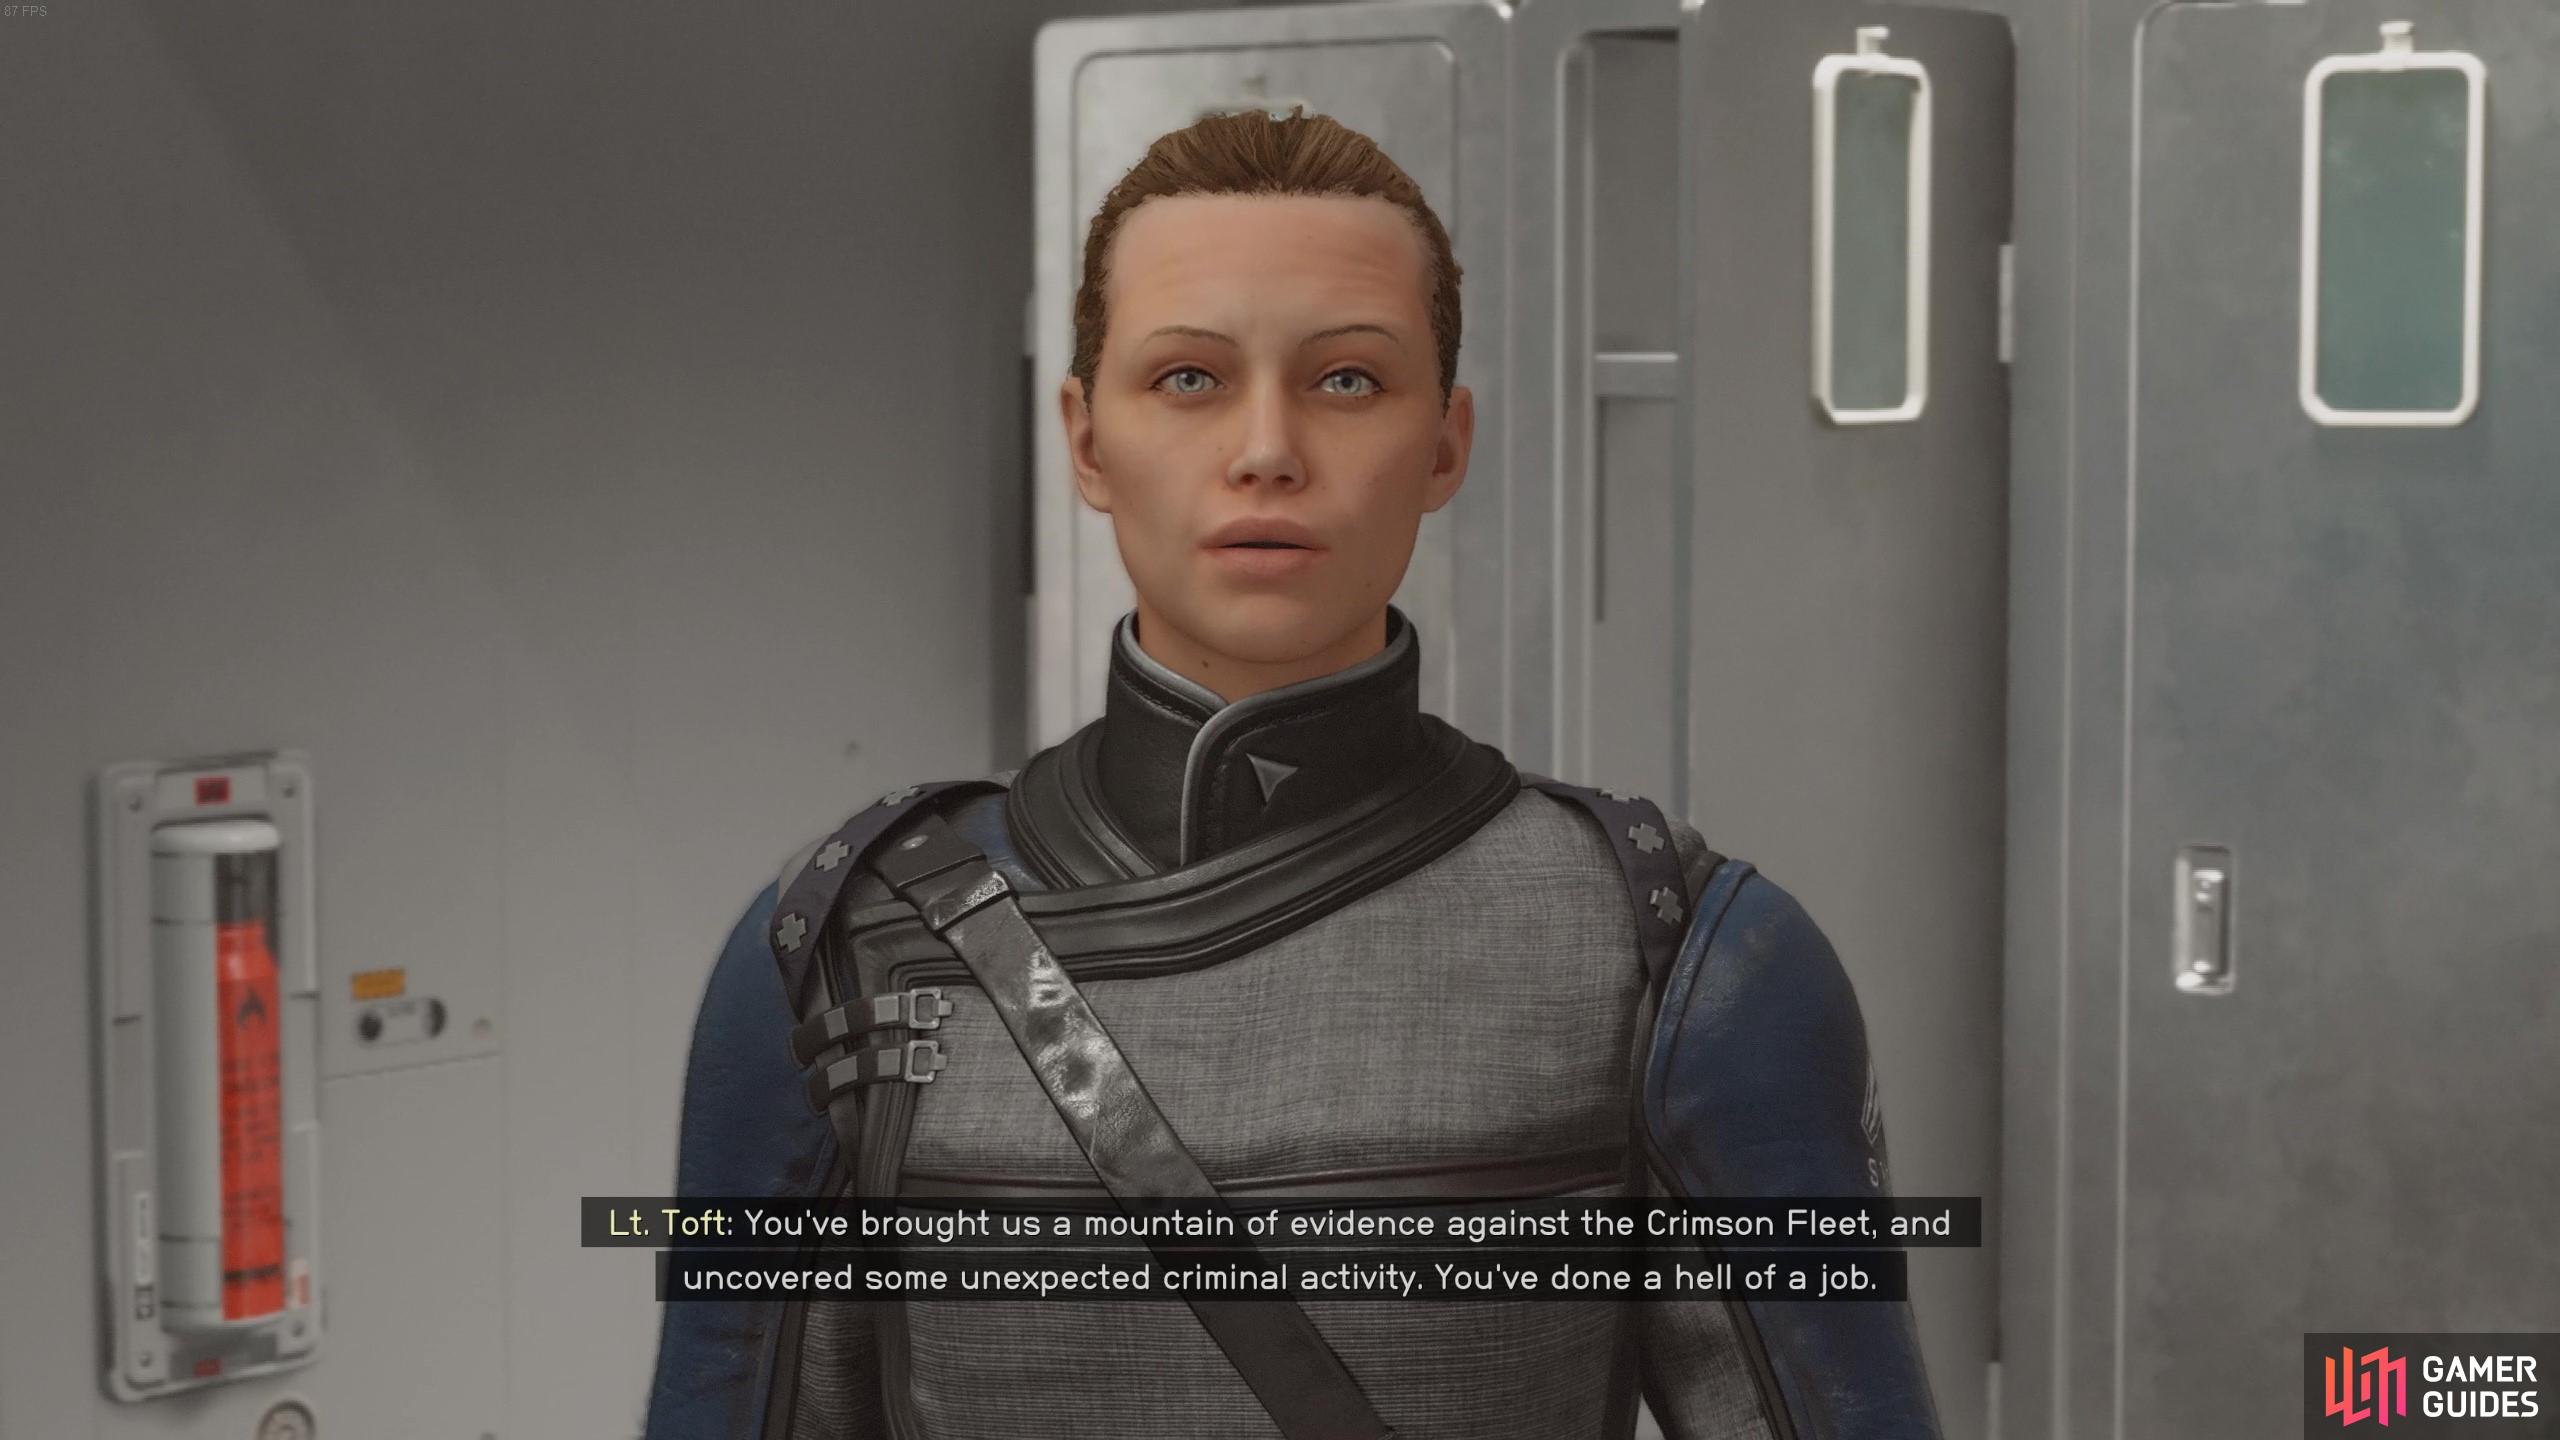 After handing in at least 18 bits of evidence speak to Toft about her past in the Crimson Fleet